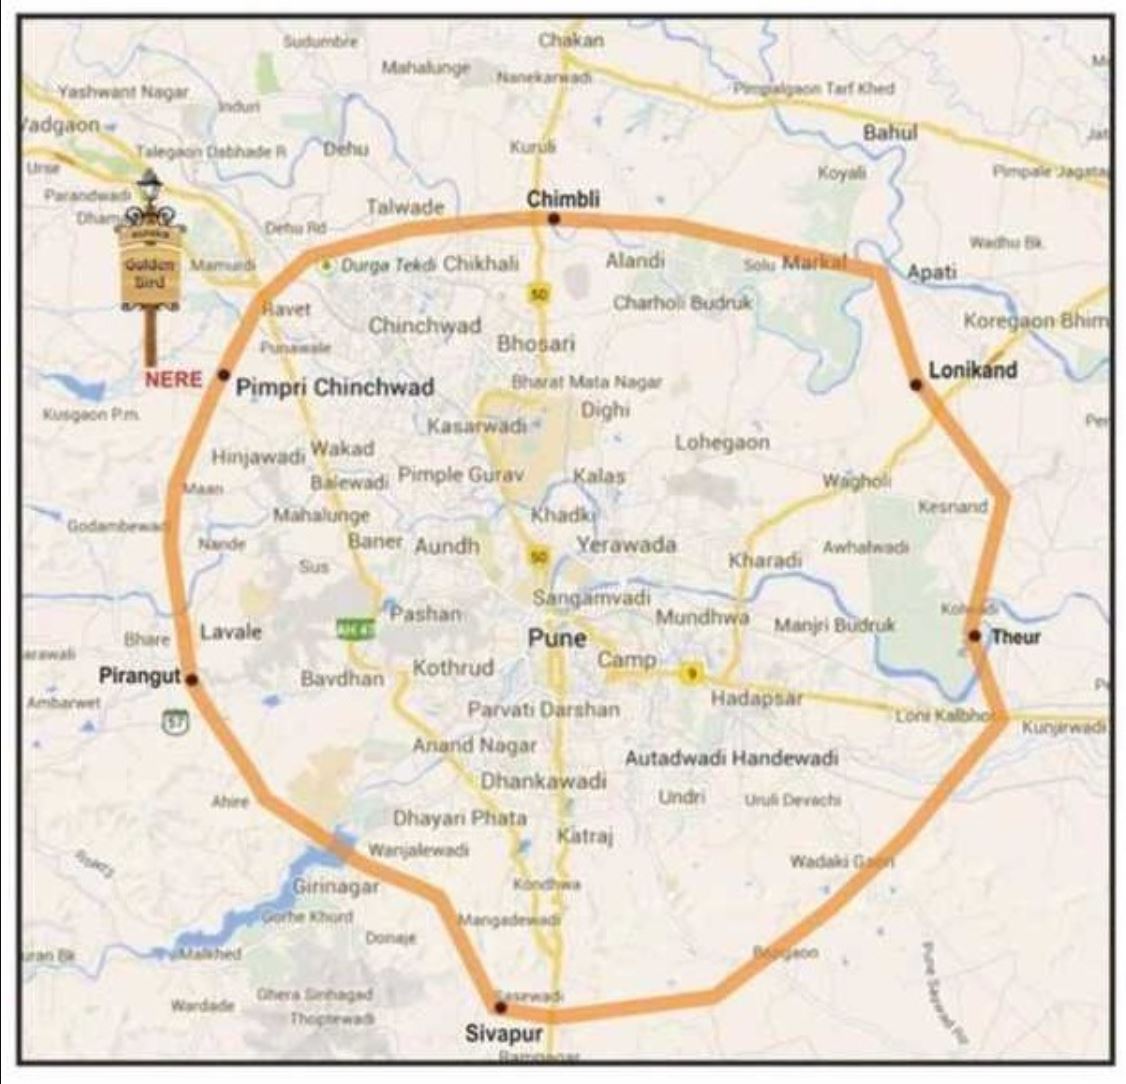 The complete alignment for Bengaluru's Satellite Town Ring Road is out and  land acquisition has started! This massive project will form a beltway  around the city, at a 40km radius from the